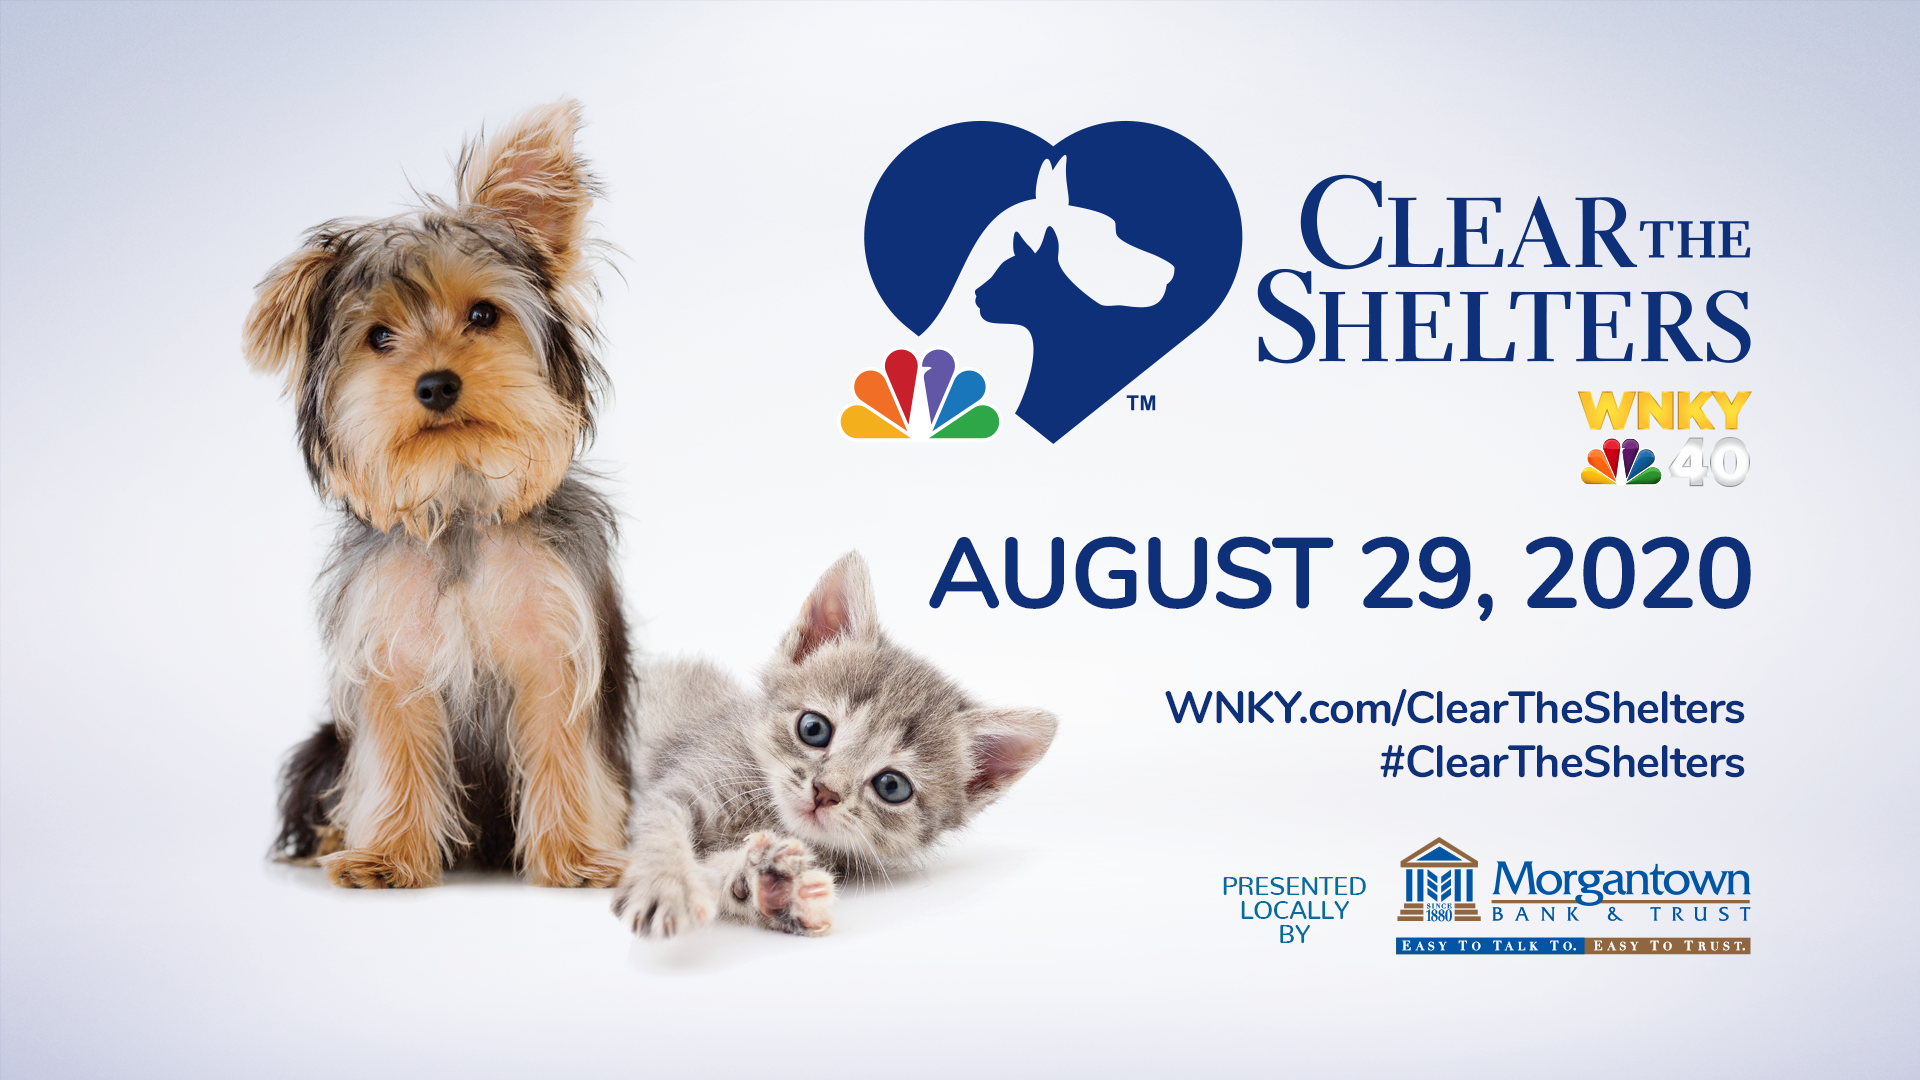 Clear The Shelters WNKY 40 News